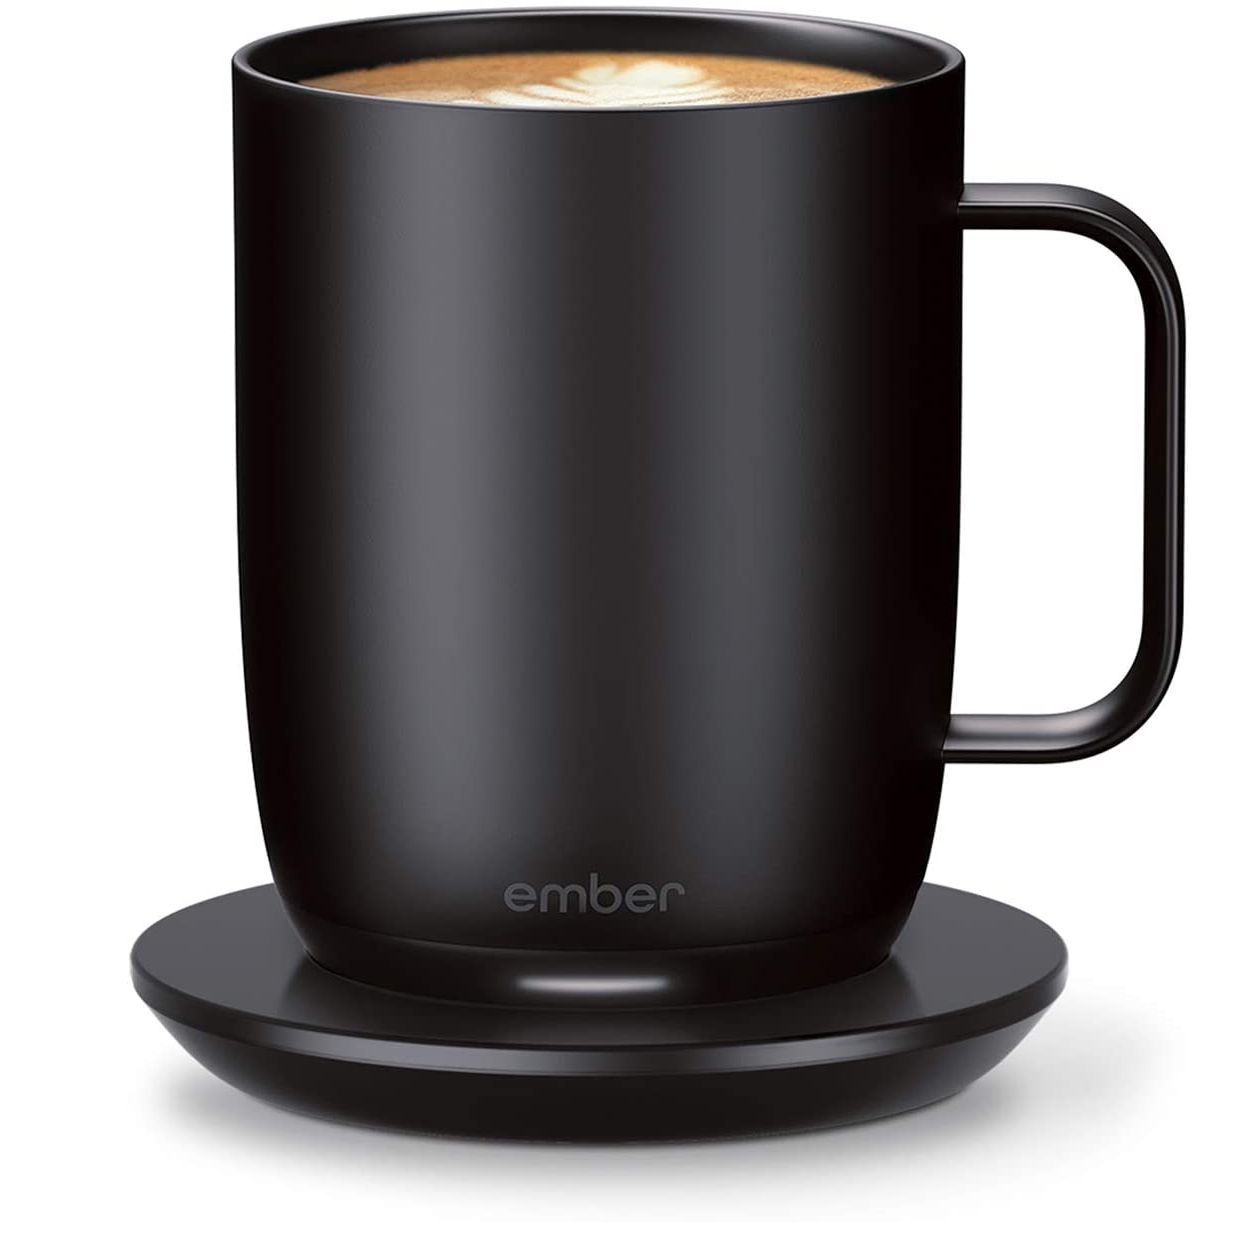 20 Best Coffee Mugs - Cool Mugs to Use at Home